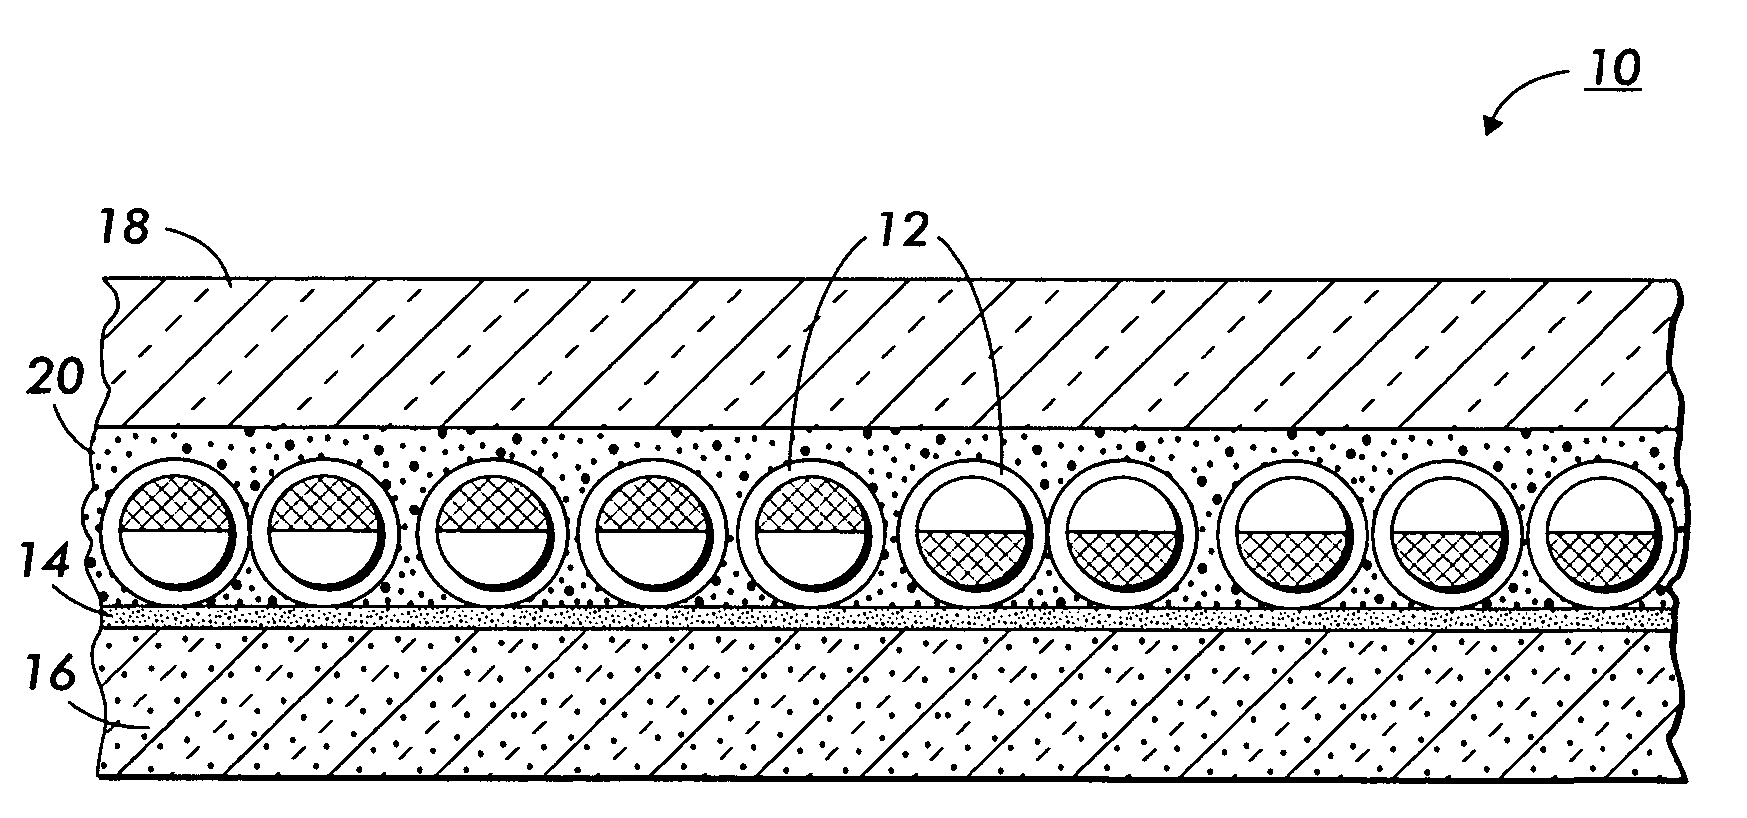 Contrast enhancement in multichromal display by incorporating a highly absorptive layer